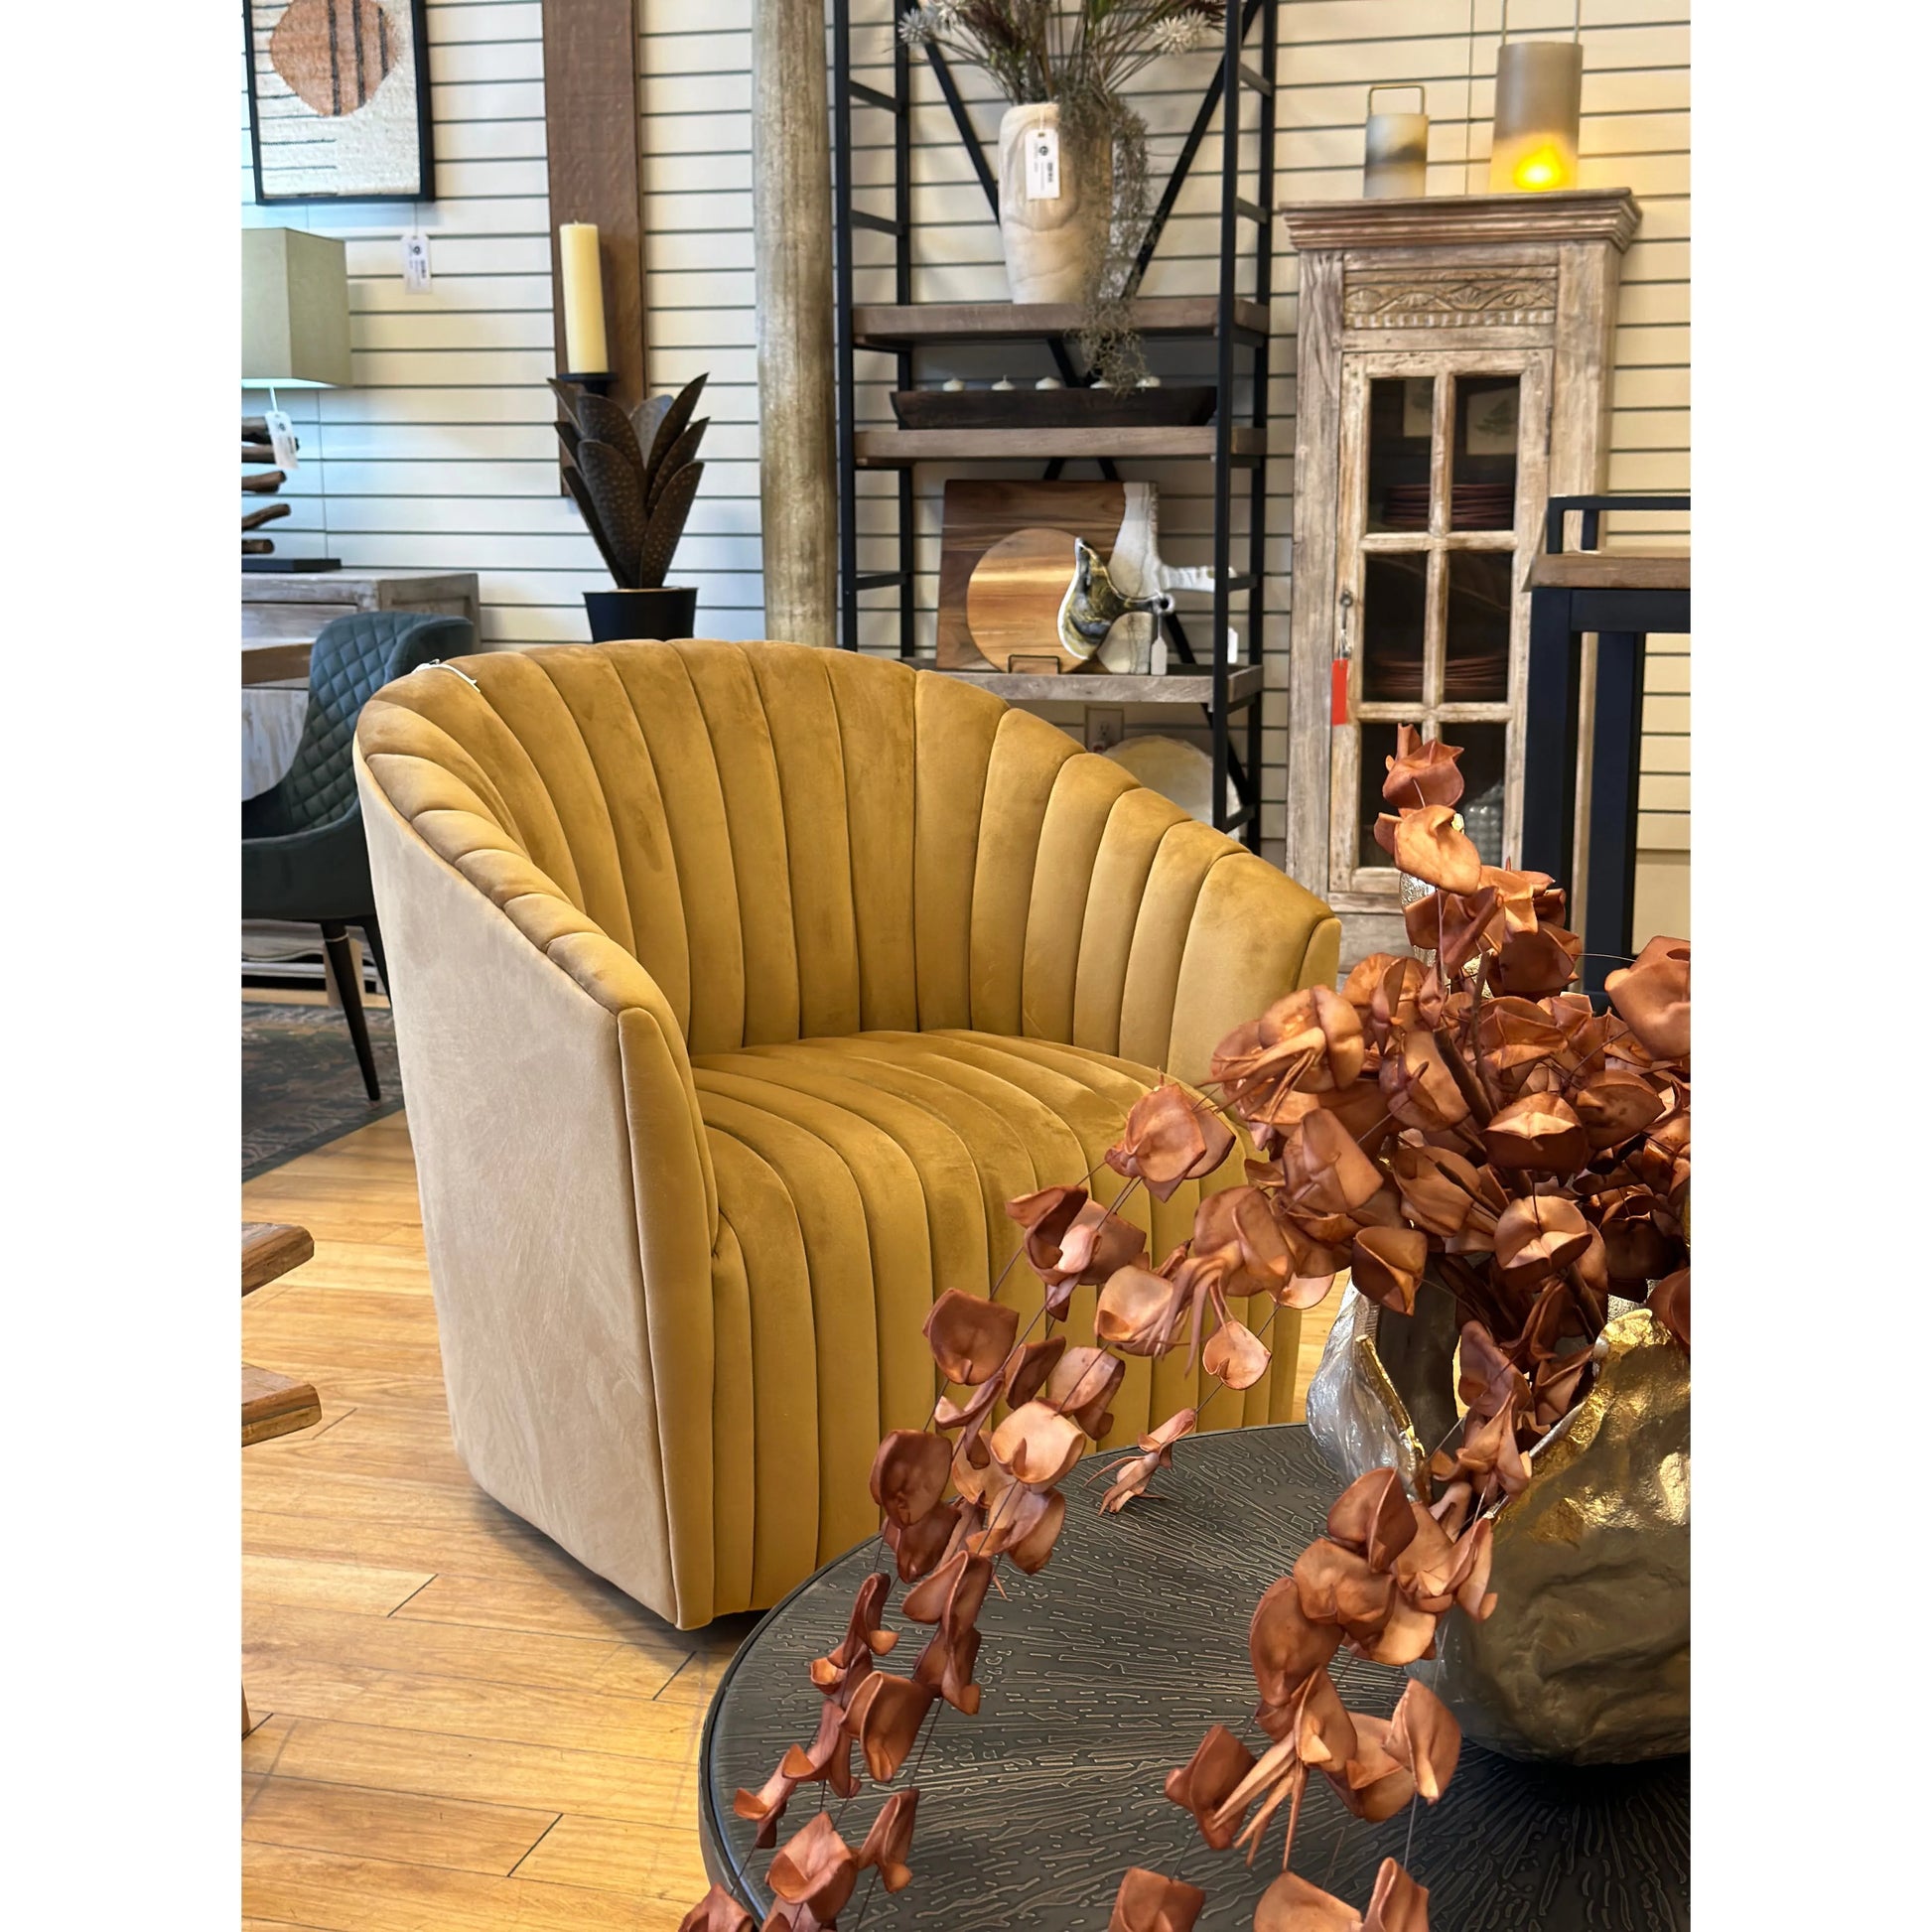 A luxurious Adaline Swivel Accent Chair in mustard yellow polyester with vertical pleats sits in a stylish home decor showroom featuring shelves with various decorative items, and a foreground of shiny copper leaves spilling from a metallic vase.